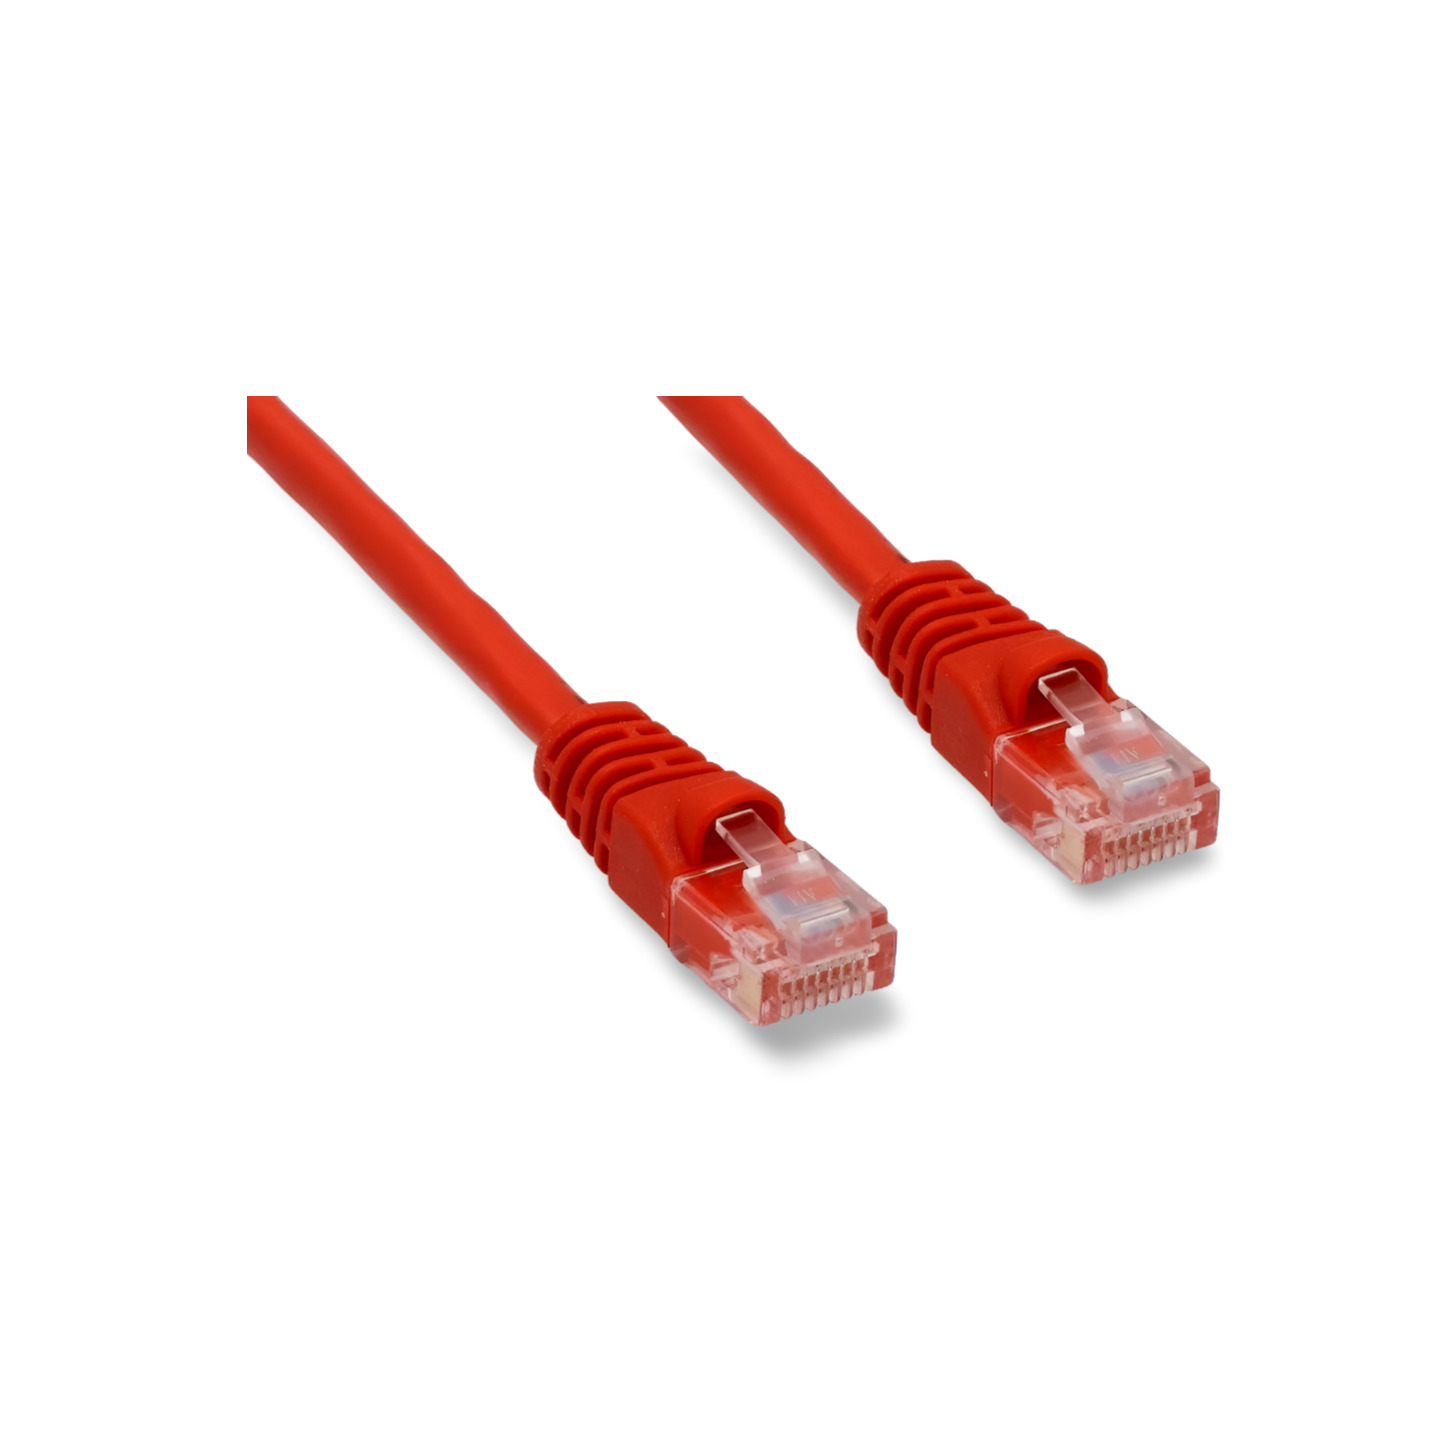 3ft Cat6 Ethernet Gigabit Crossover Network Cable RJ45 4 Pair - Red